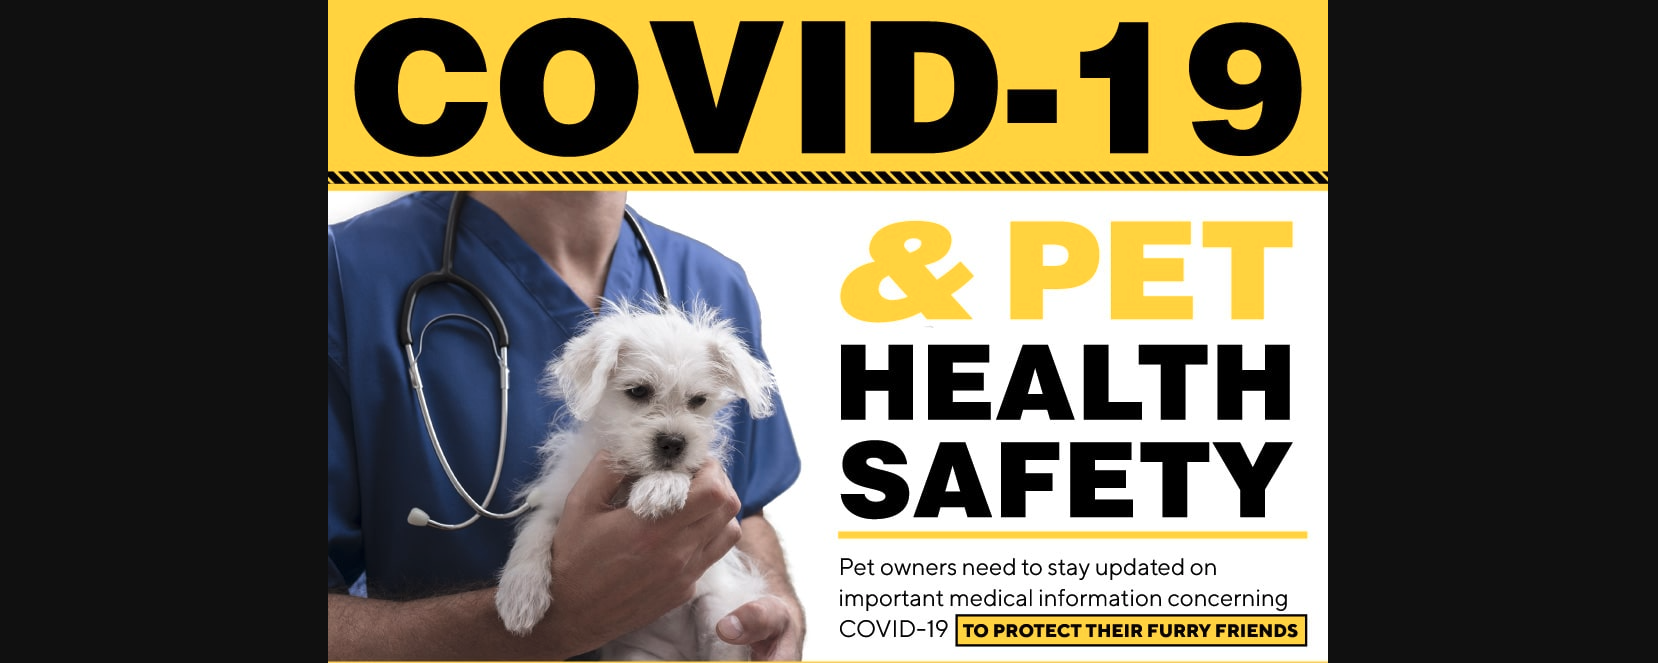 Covid-19-and-pet-health-safety